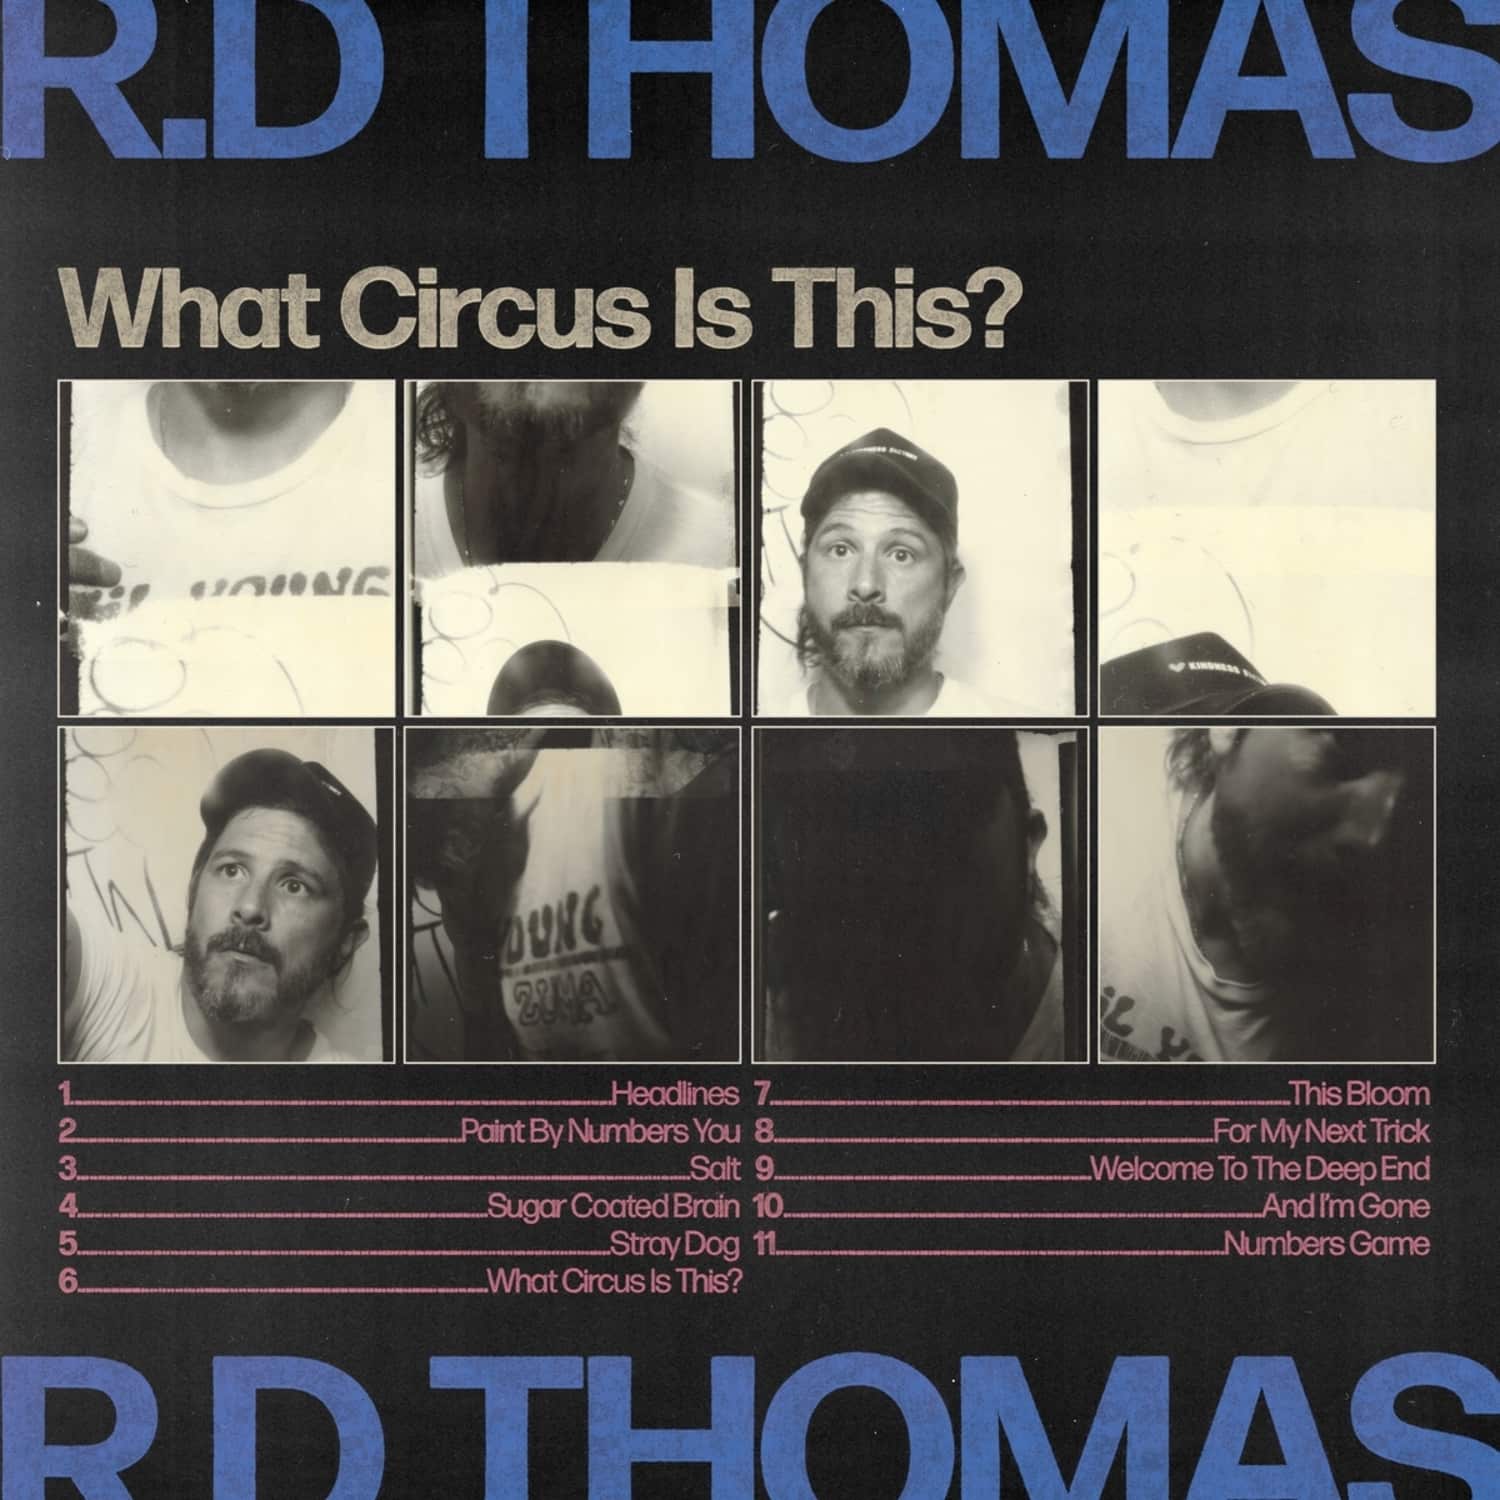  R.D. Thomas - WHAT CIRCUS IS THIS? 